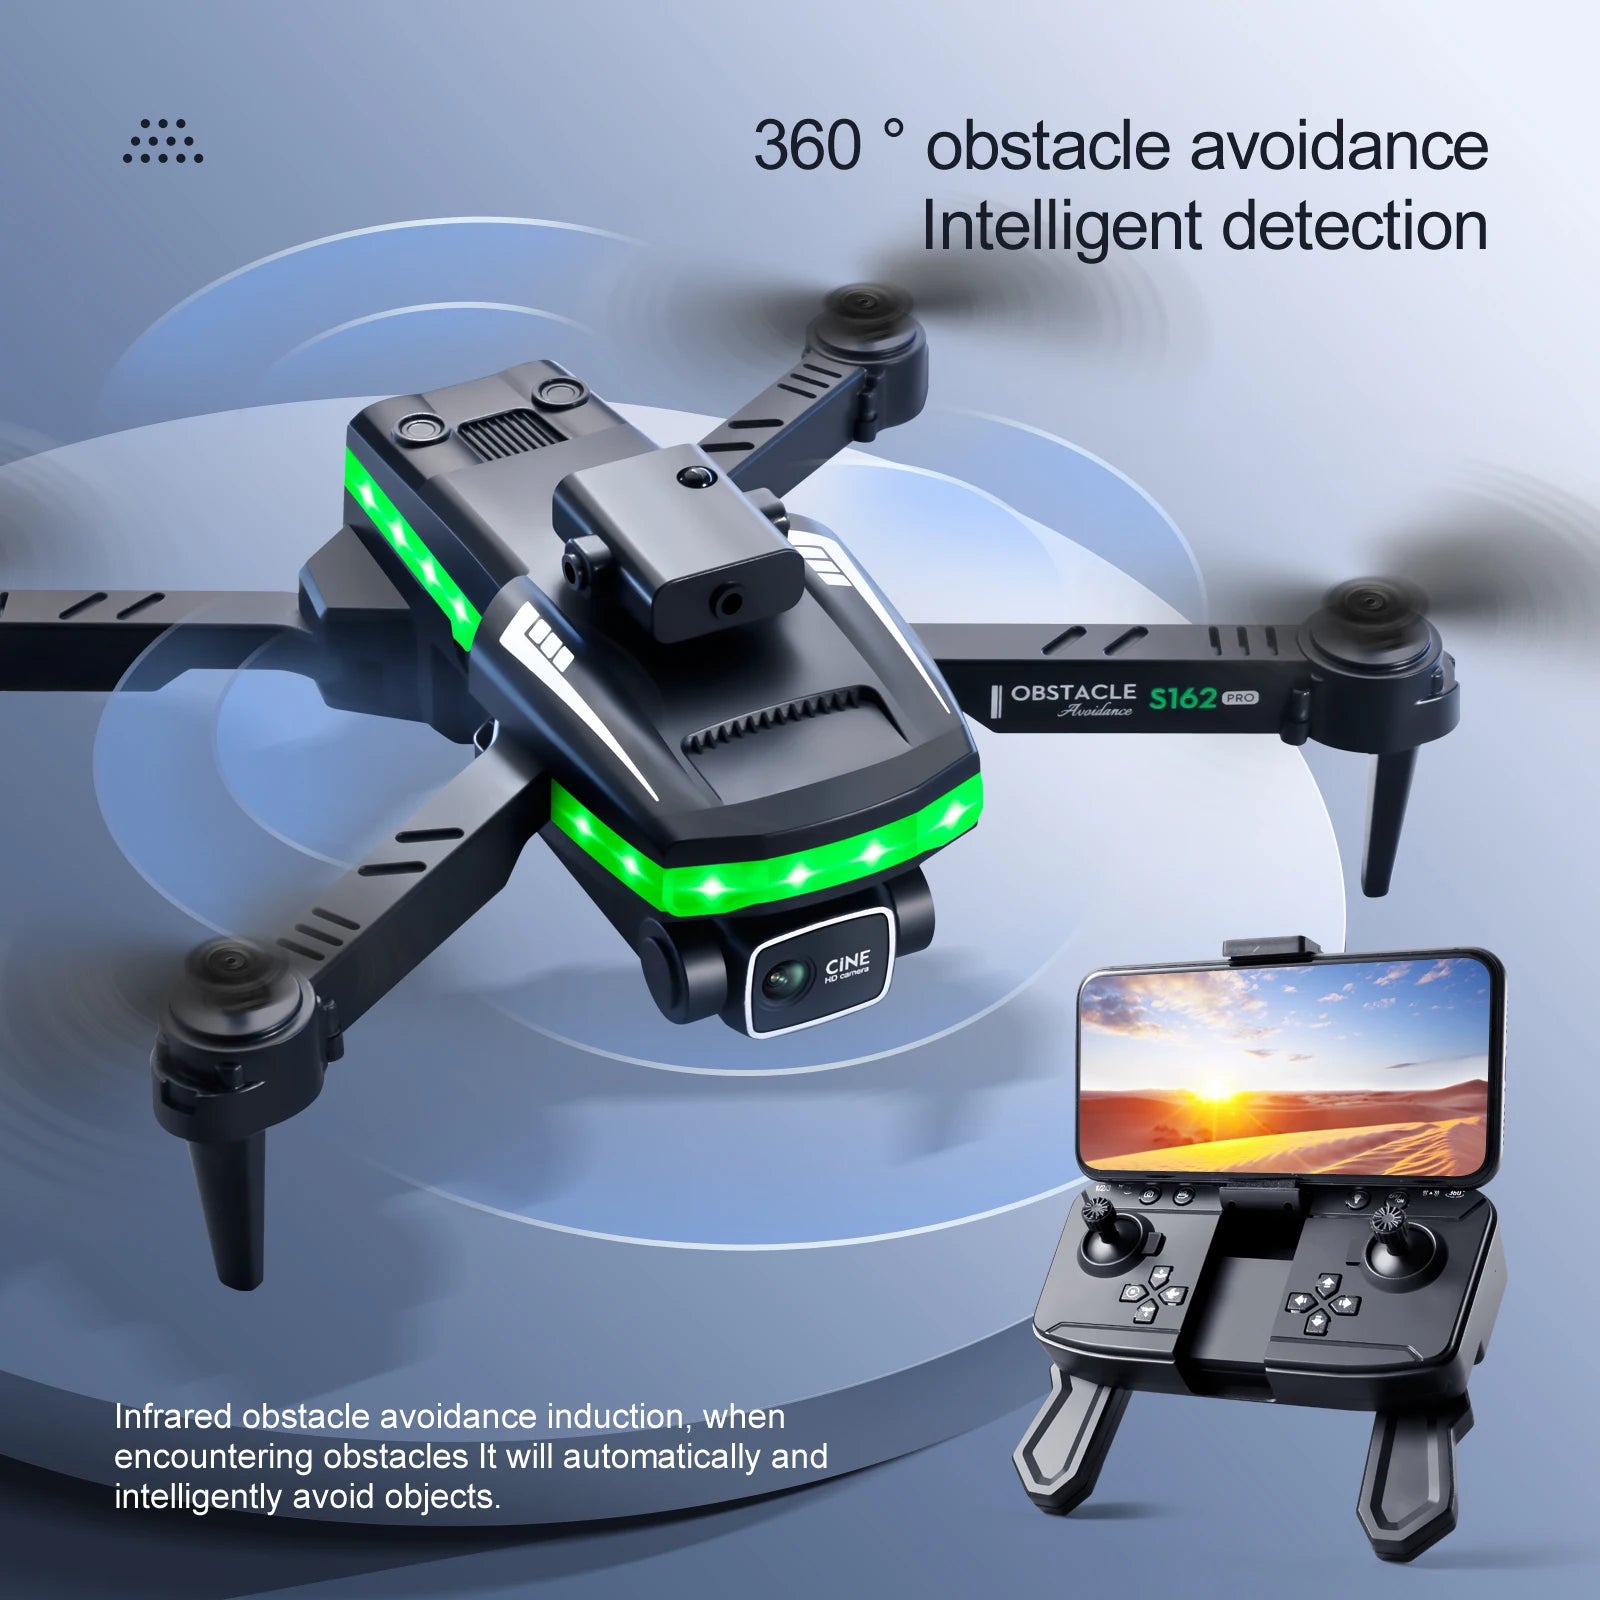 S162 Pro Drone, savoidance cine infrared obstacle avoidance in